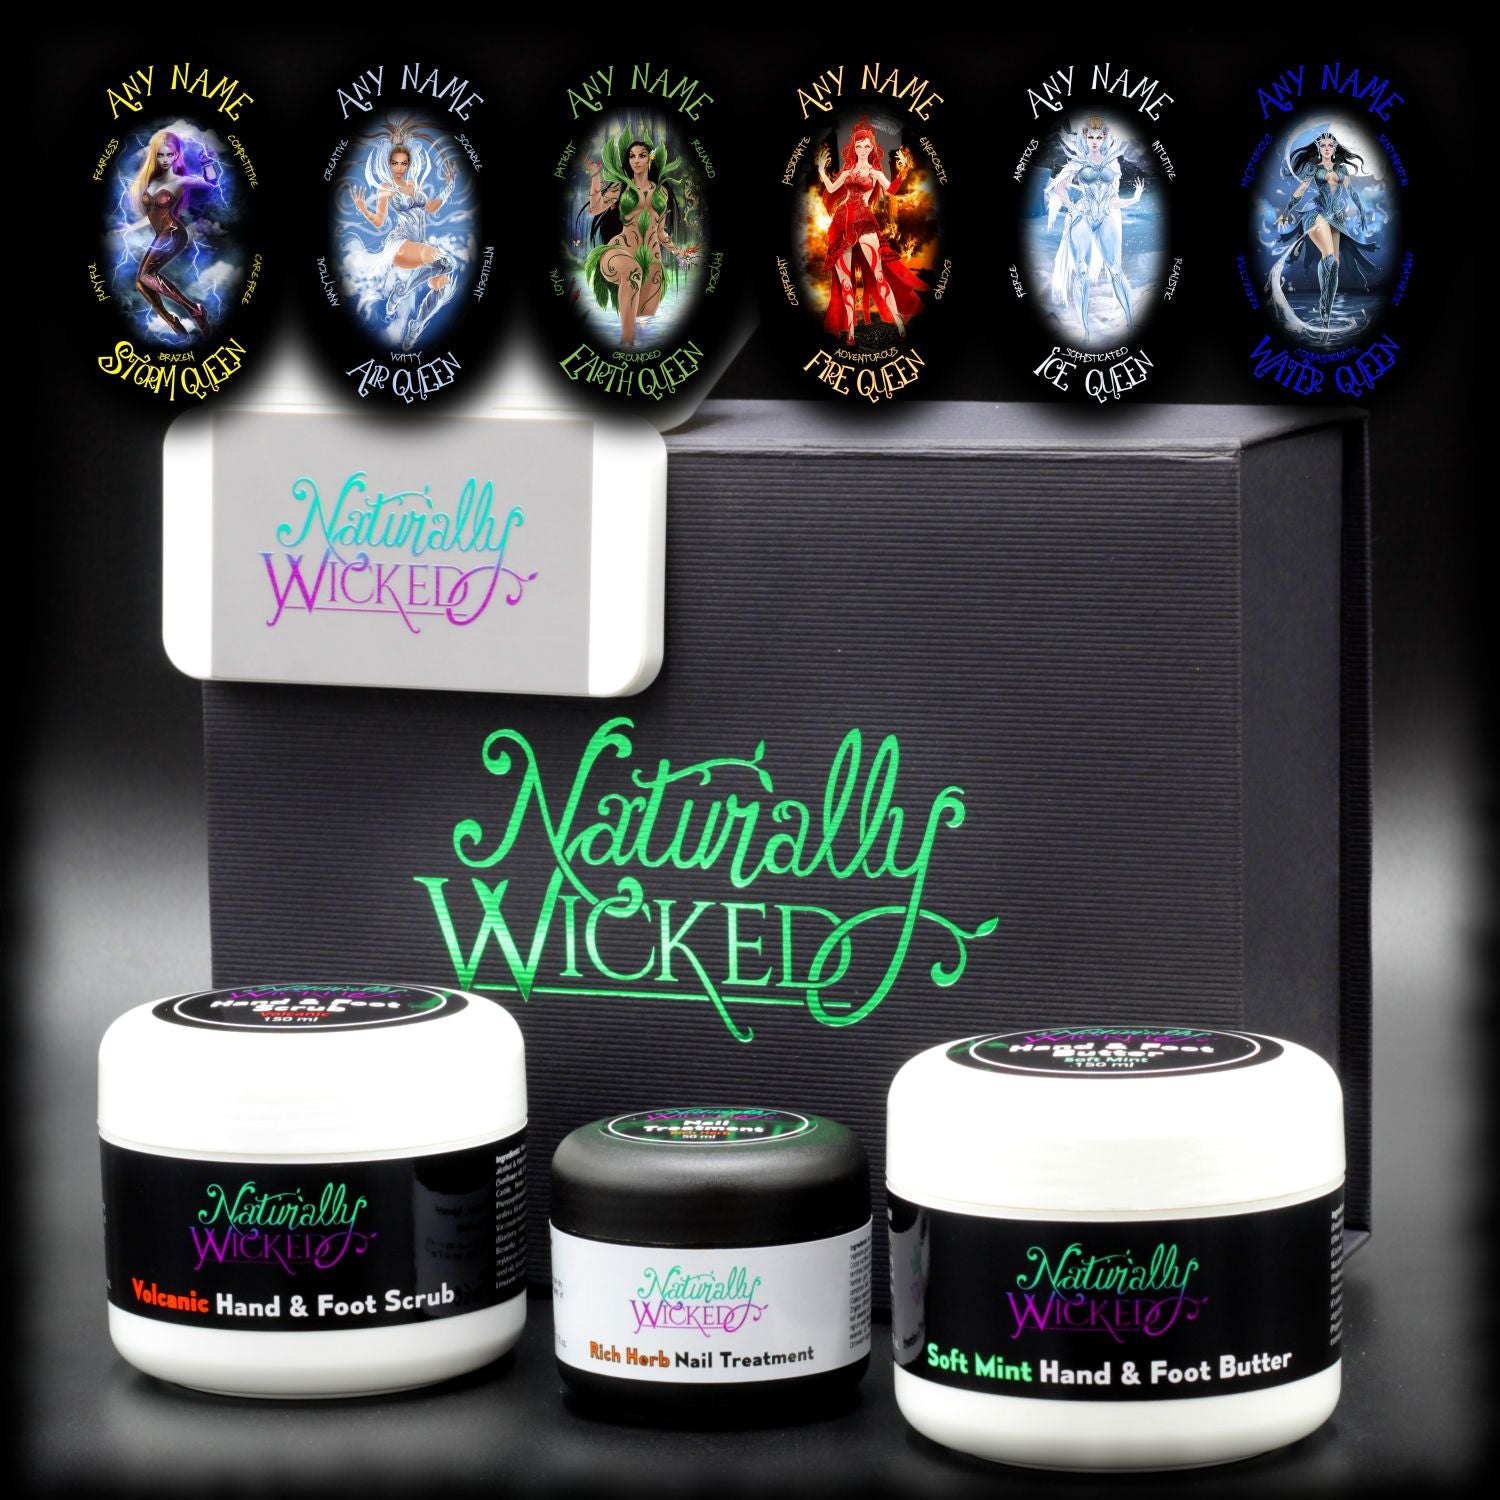 Personalised Naturally Wicked Hand & Foot Beauty Gift Set For Her With Hand & Foot Scrub, Nail Treatment & Hand & Foot Butter